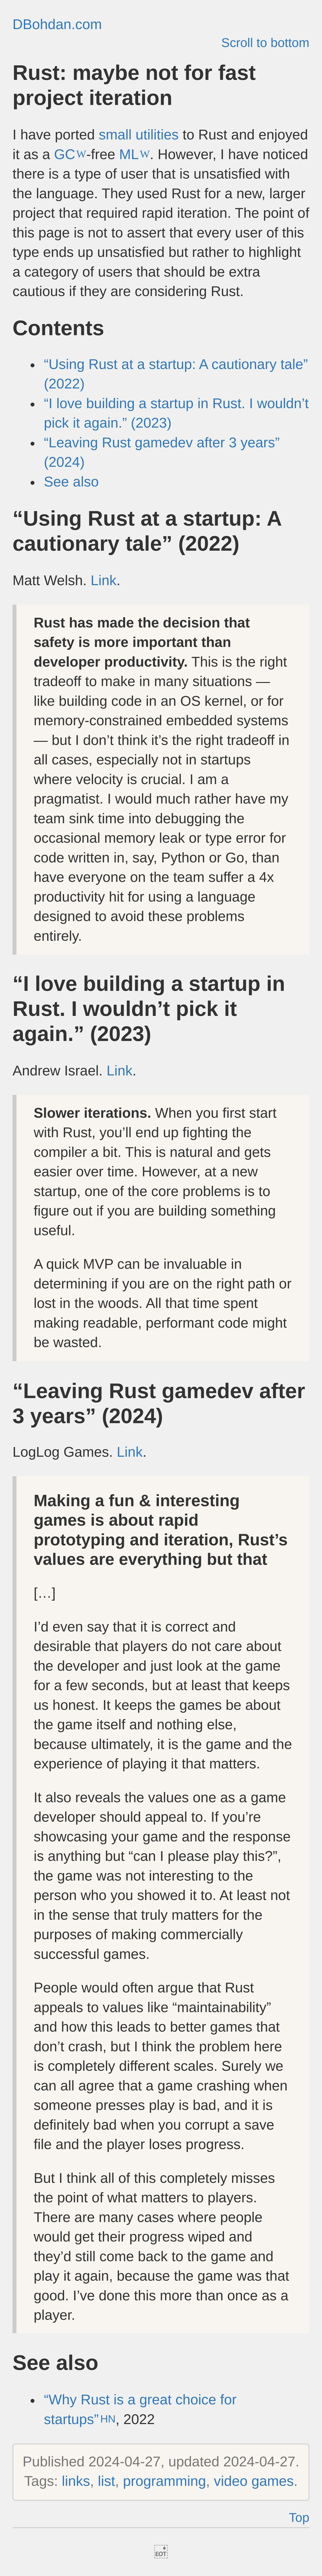 Rust: Maybe Not for Fast Project Iteration